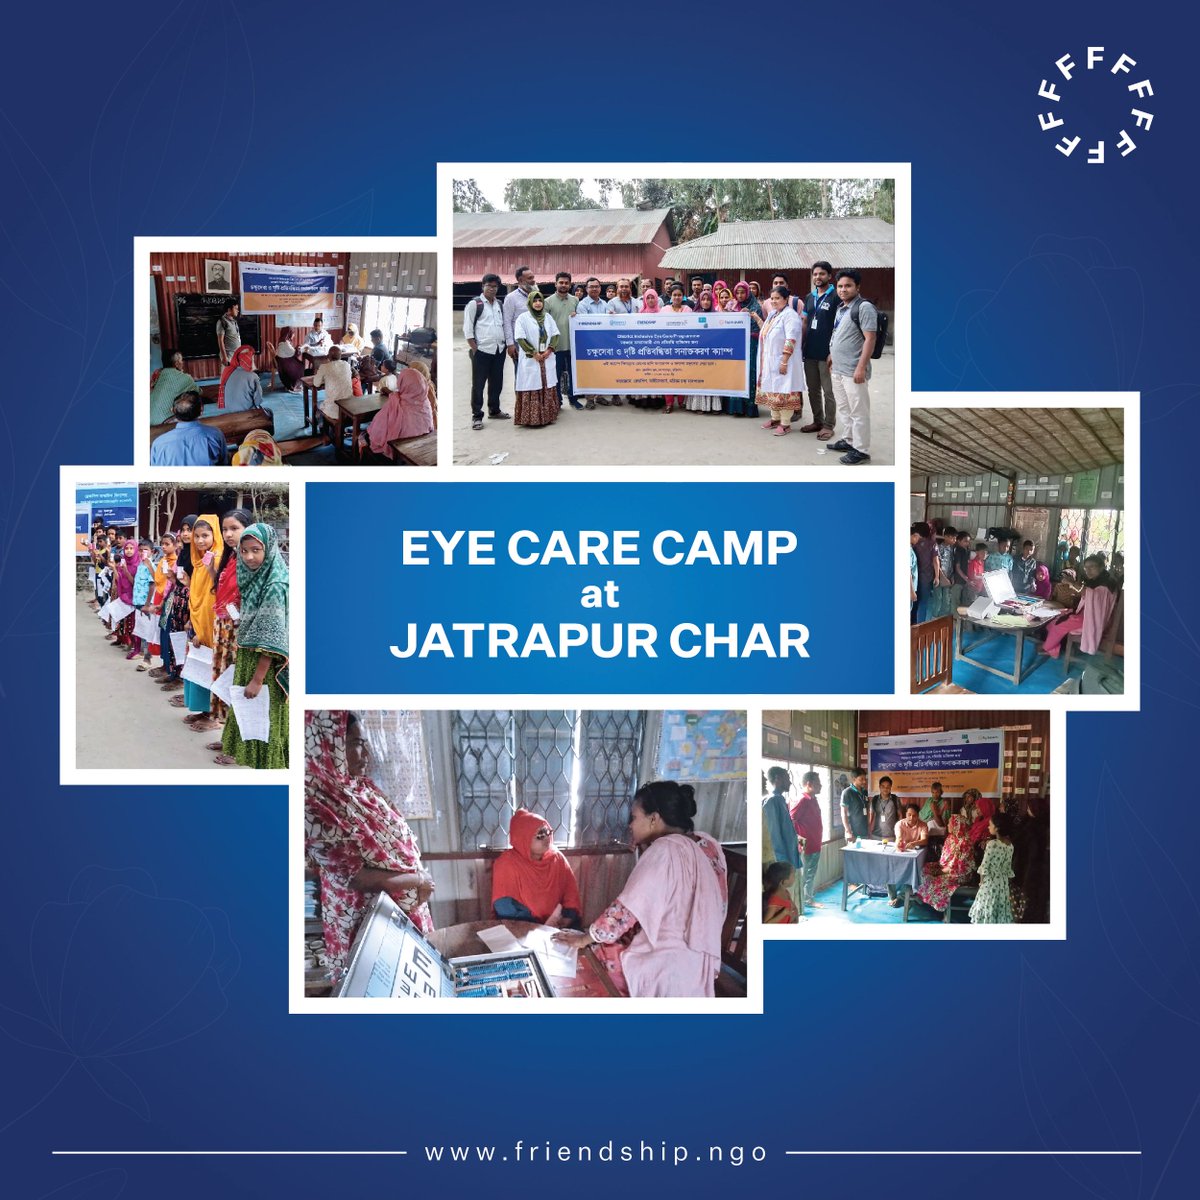 Through our recent 'Eye Screening and Eye Care Camp' in Jatrapur Char, over 130 individuals received vital eye care, boosting not just their vision but also their capacity to contribute more fully to their community. 

#EyeHealth #CommunityCare #InclusiveDevelopment #SDG3 #SDG10